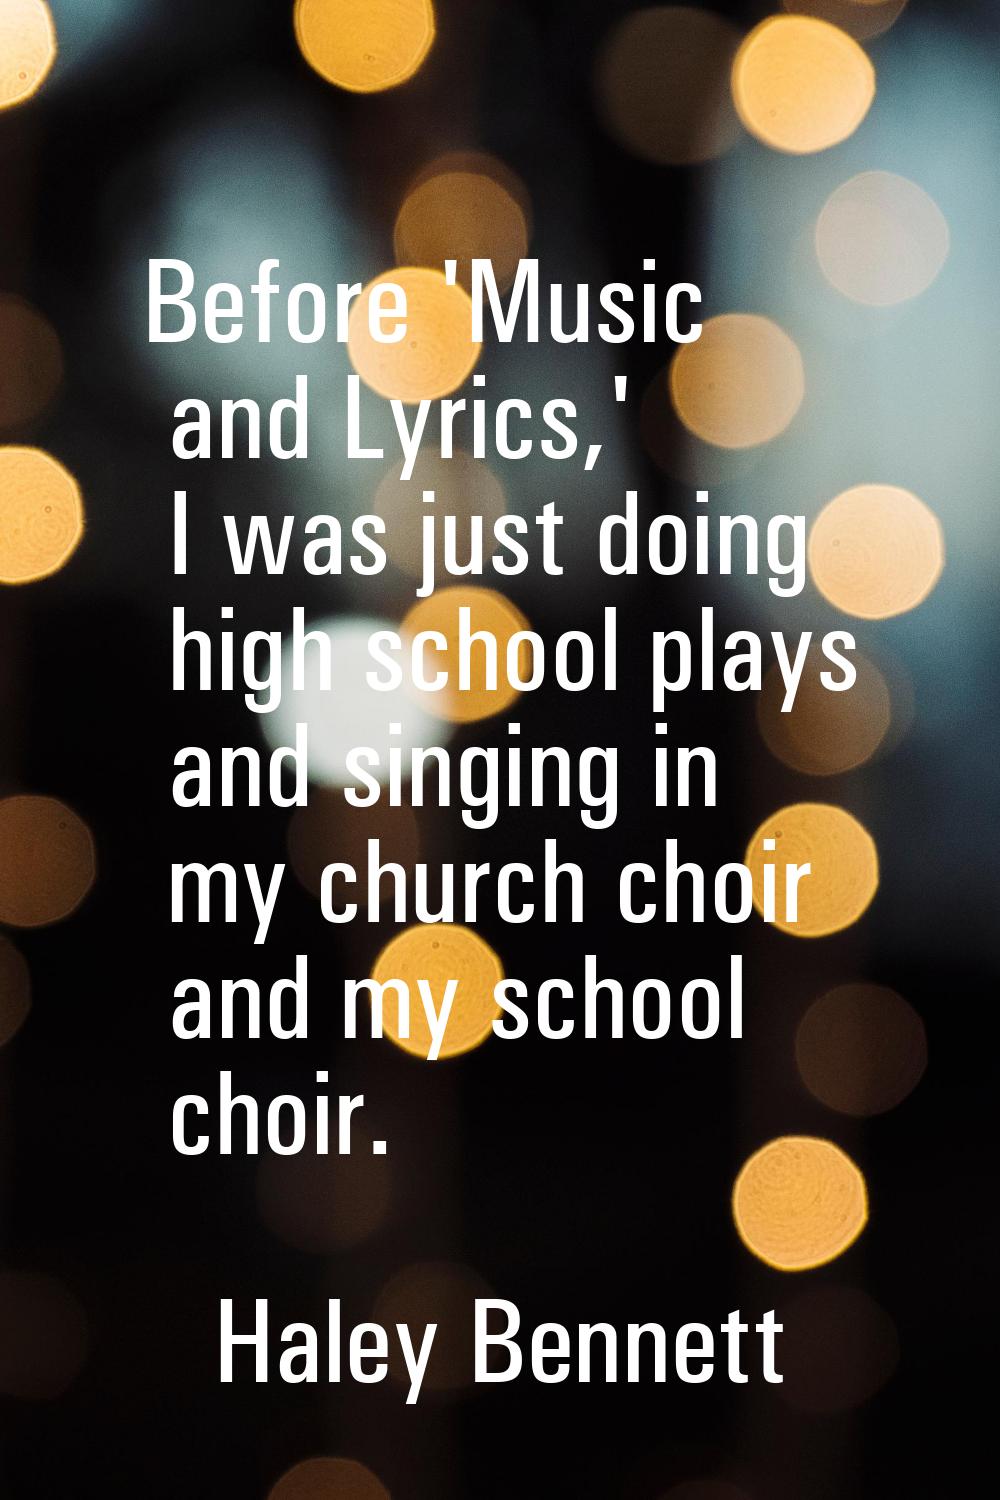 Before 'Music and Lyrics,' I was just doing high school plays and singing in my church choir and my